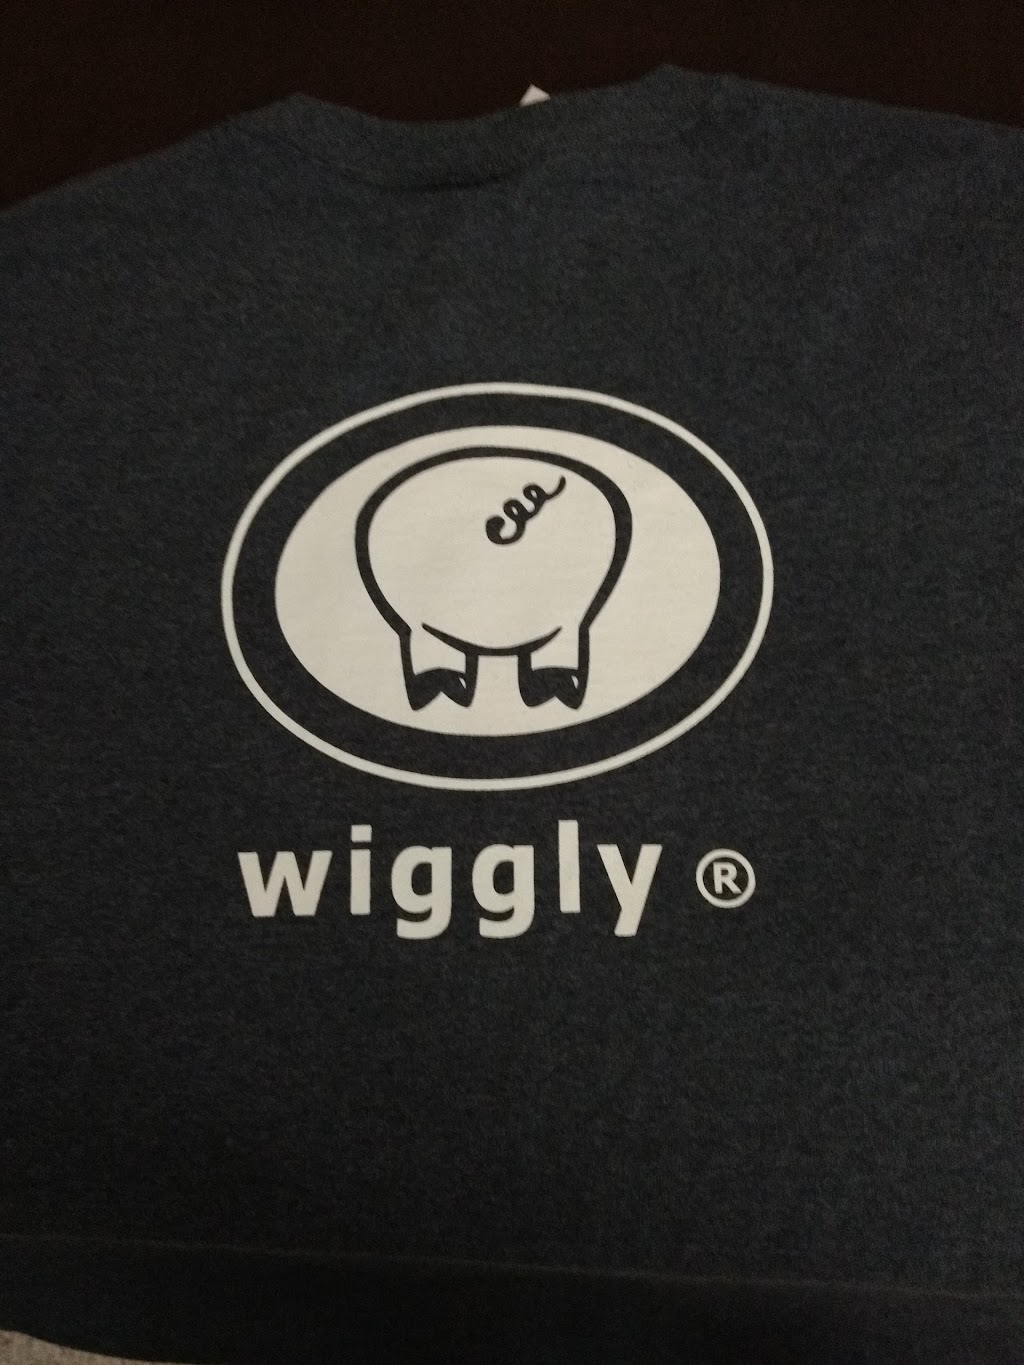 Piggly Wiggly of Broadway | 300 N Main St, Broadway, NC 27505, USA | Phone: (919) 258-3531